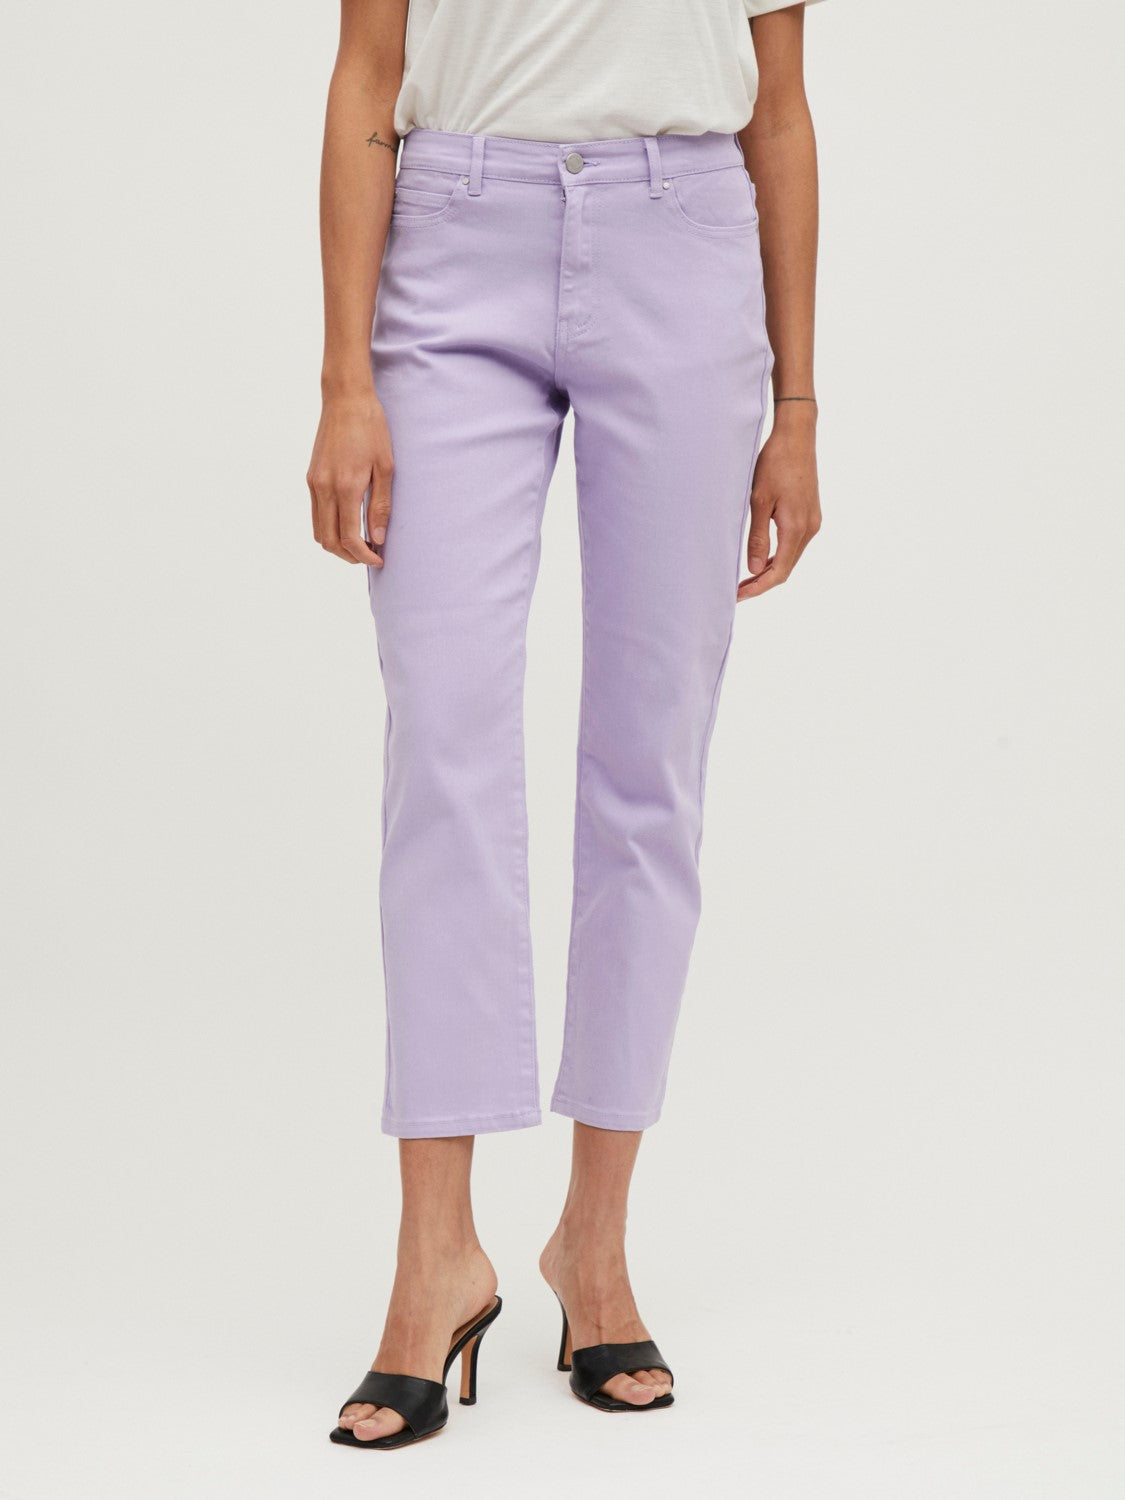 Lilac 7/8 Jeans